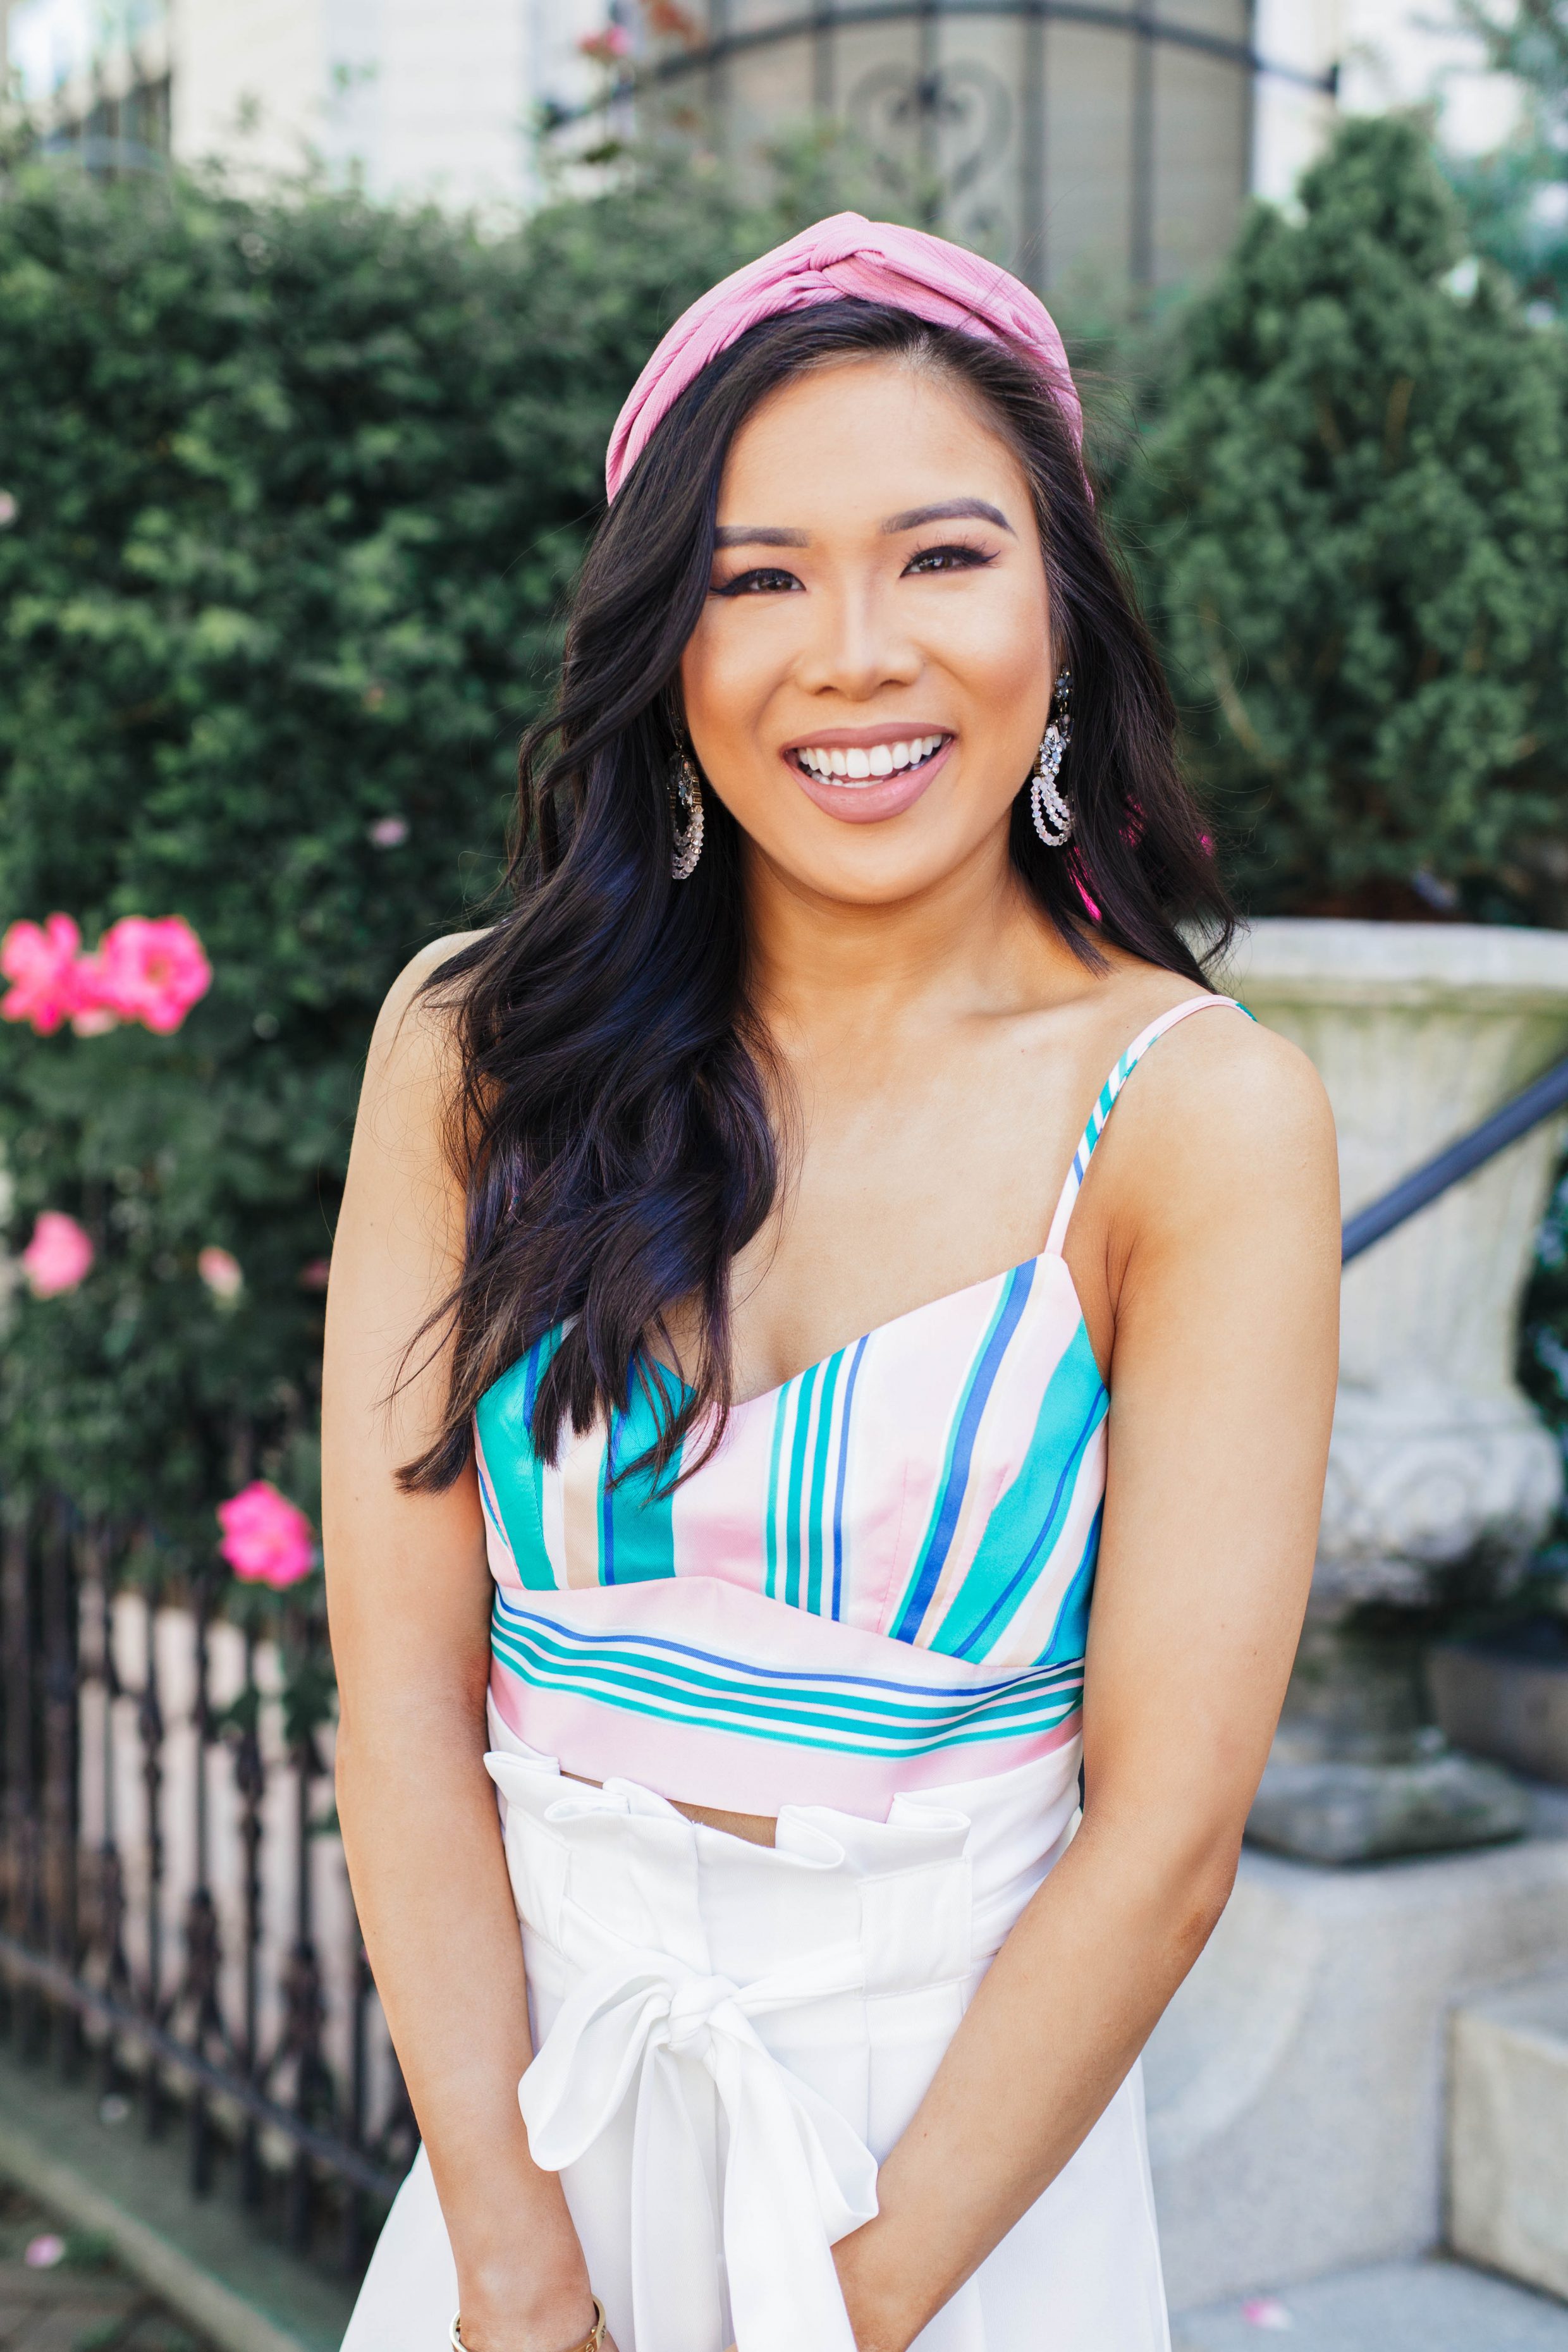 Striped crop top with a pink headband for summer outfit idea